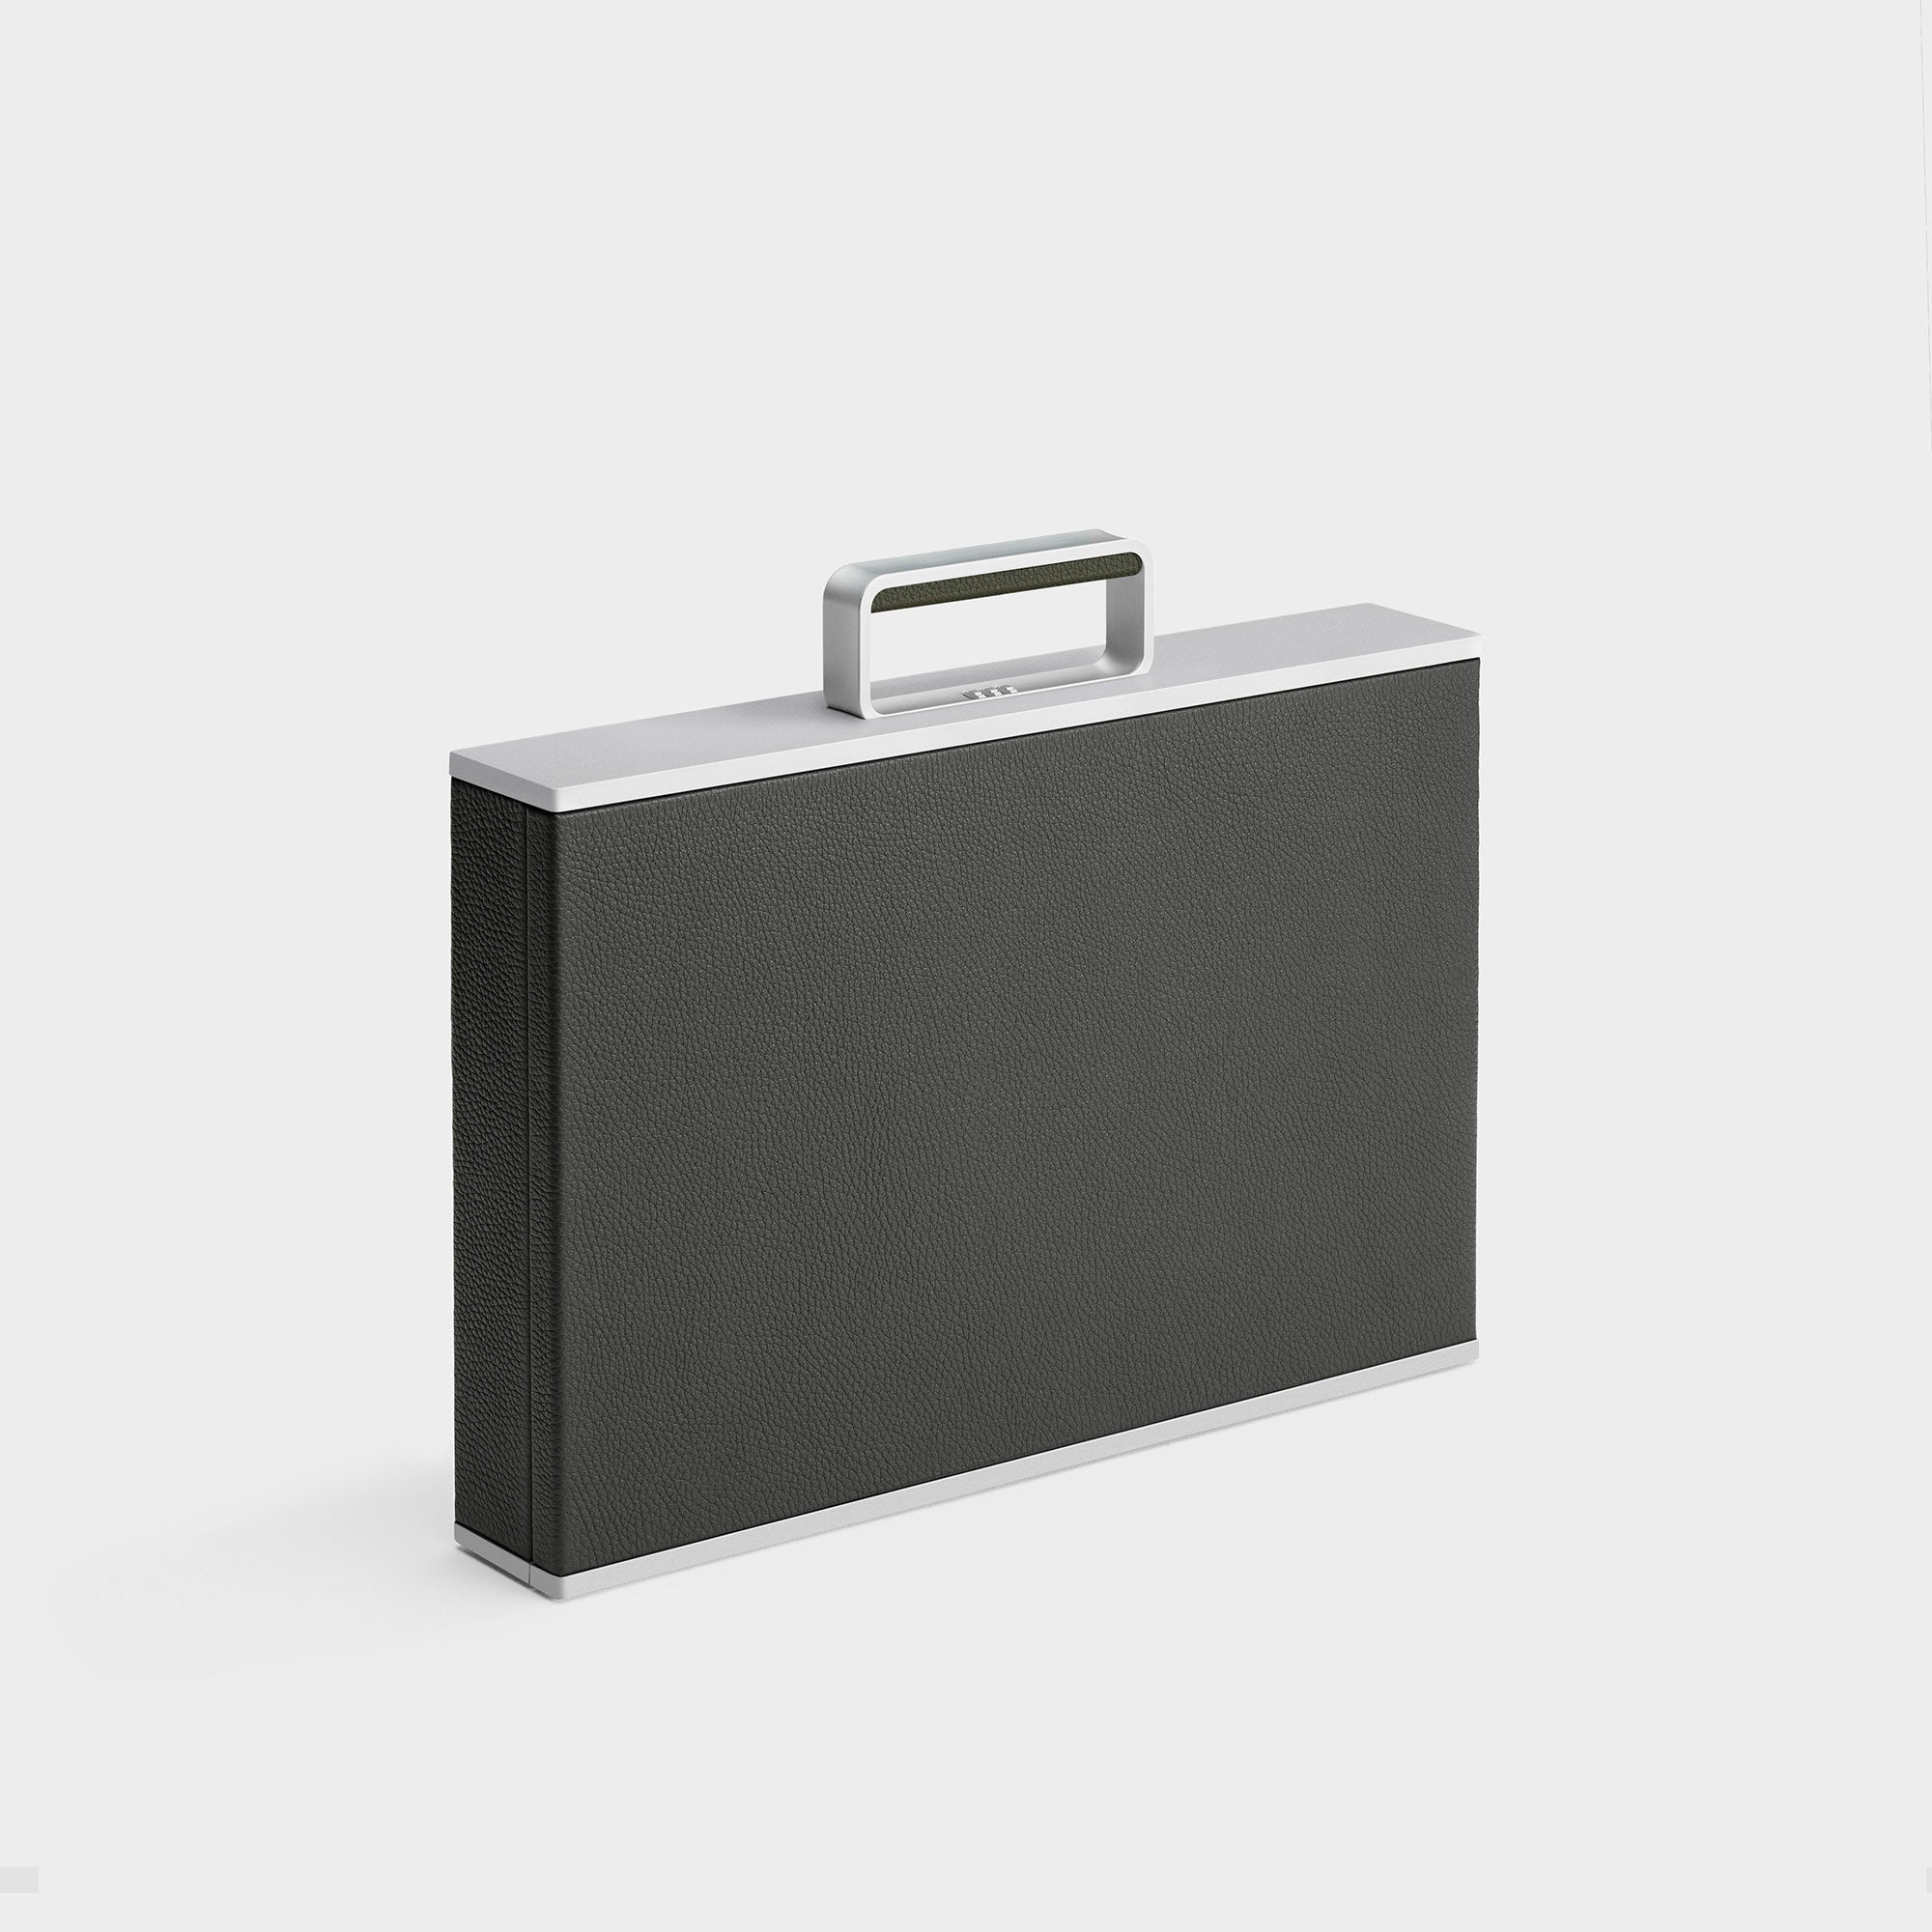 Handmade briefcase in graphite leather by Charles Simon